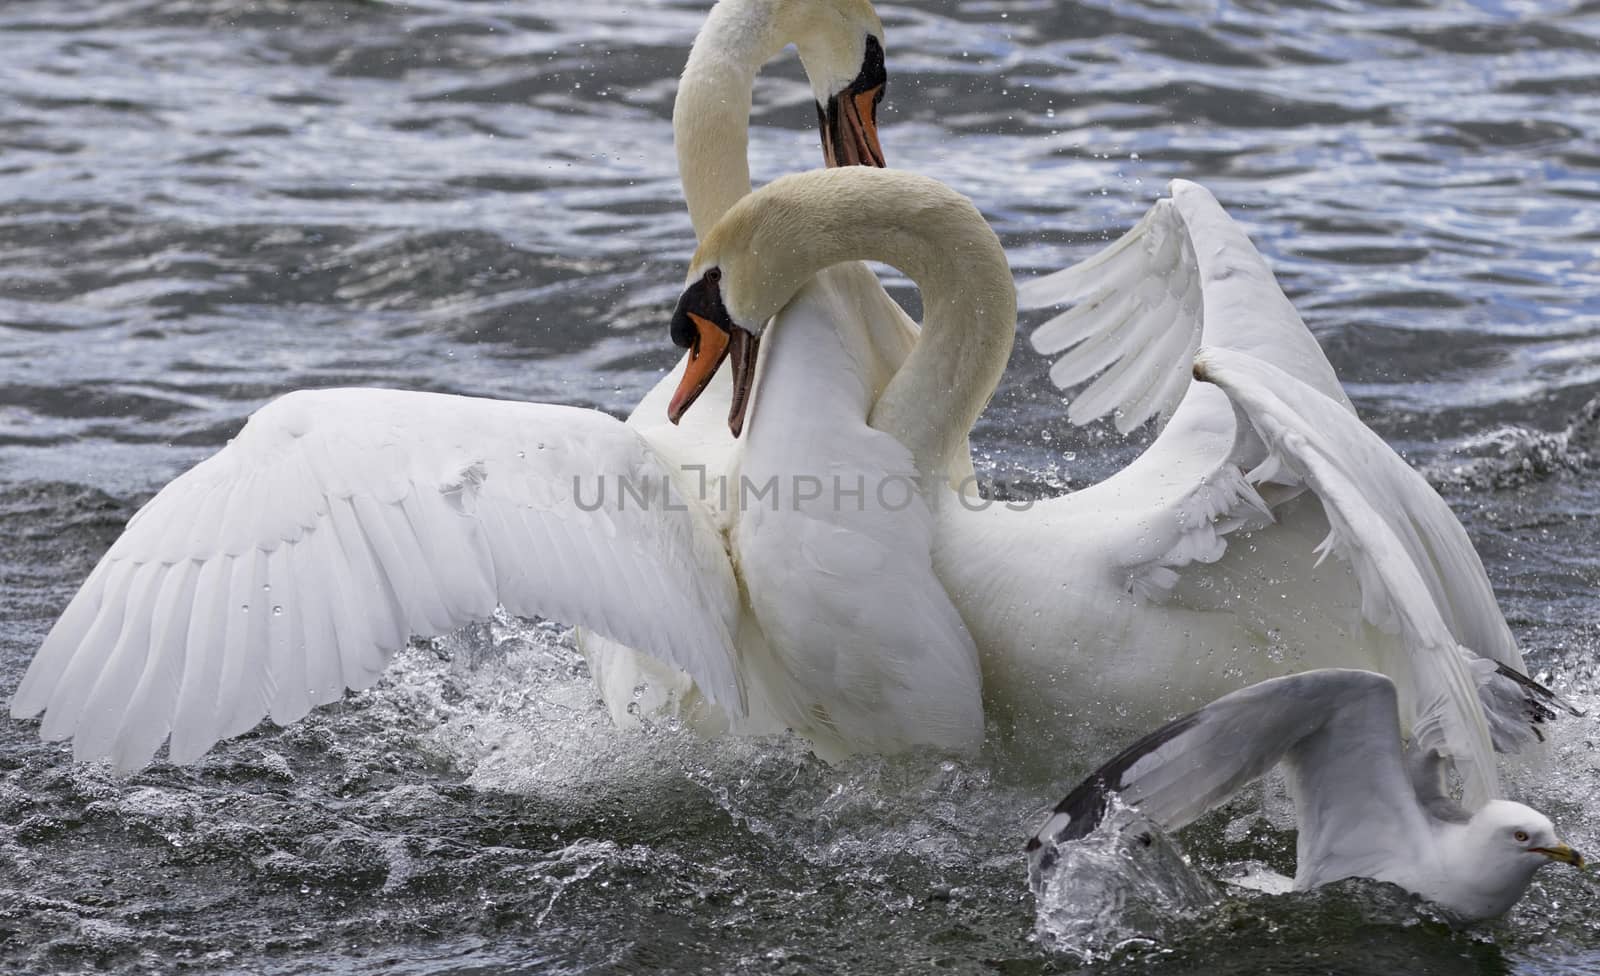 Amazing fight of the swans